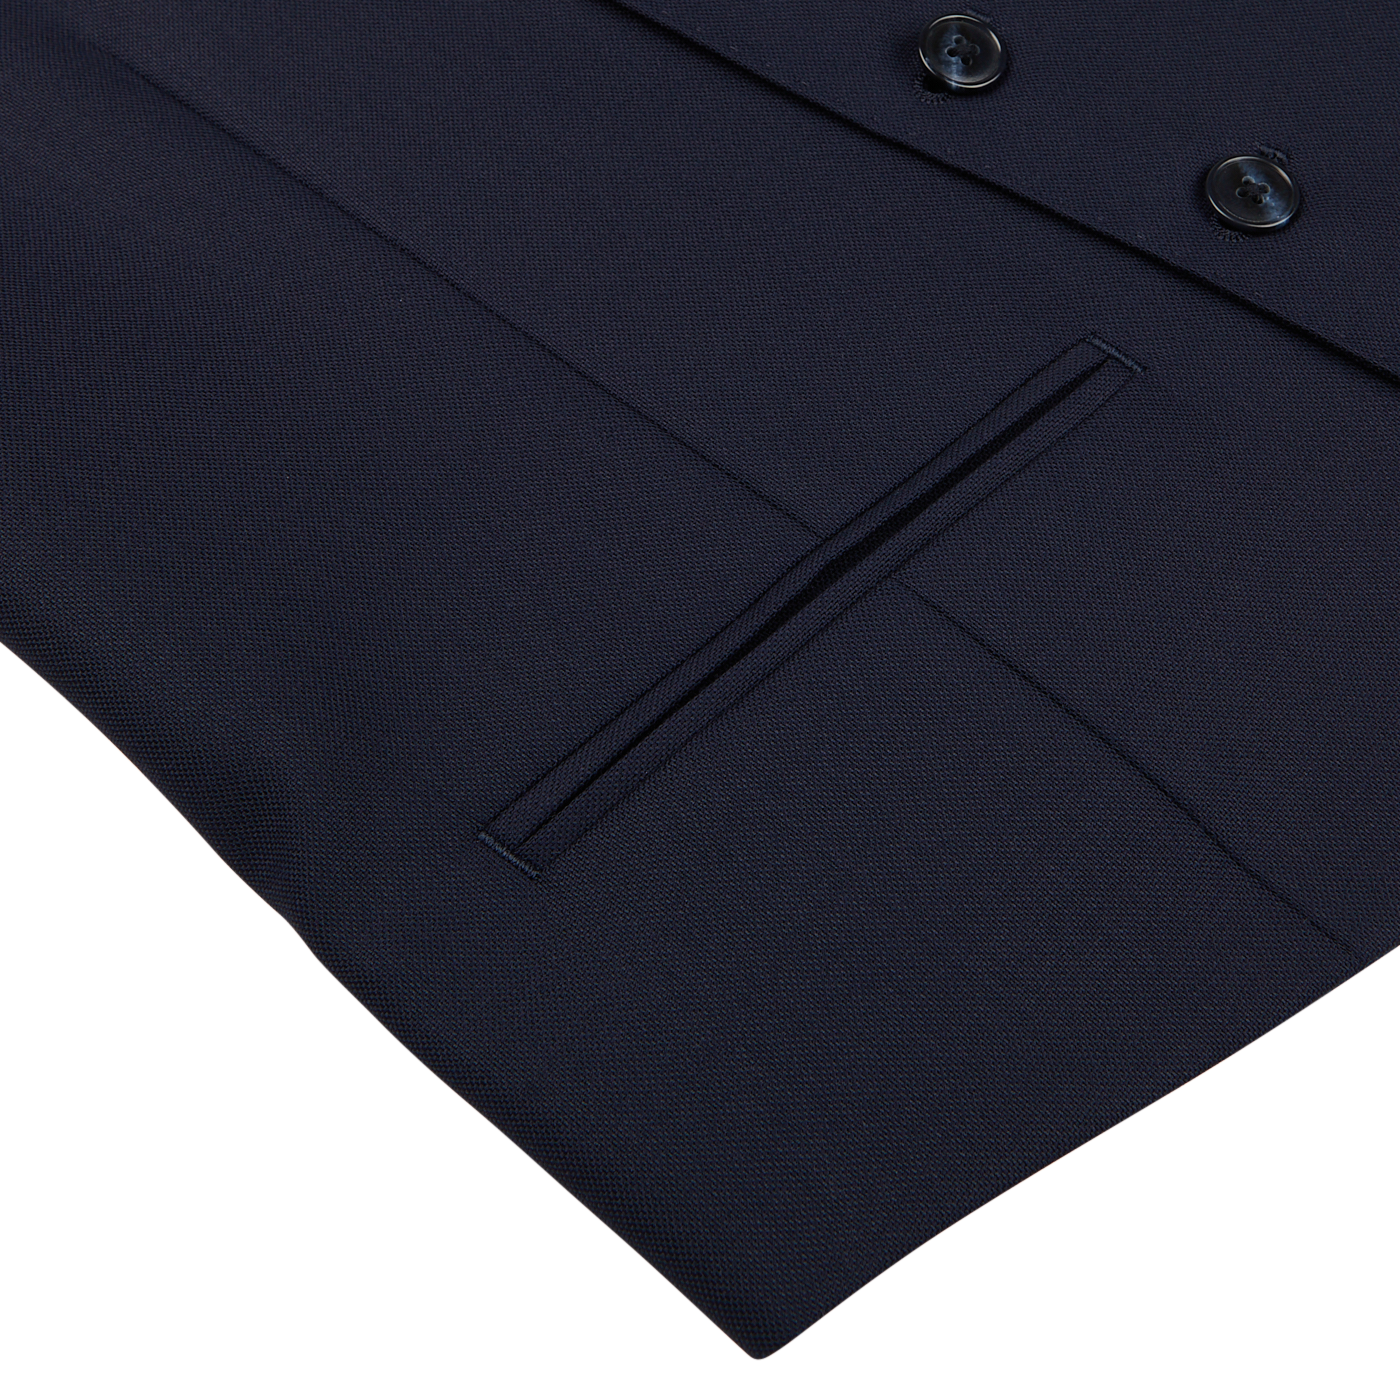 Close-up of a Baltzar Sartorial Navy Super 100s Wool DB Waistcoat showing detailed stitching, buttons, and a pocket on a white background.